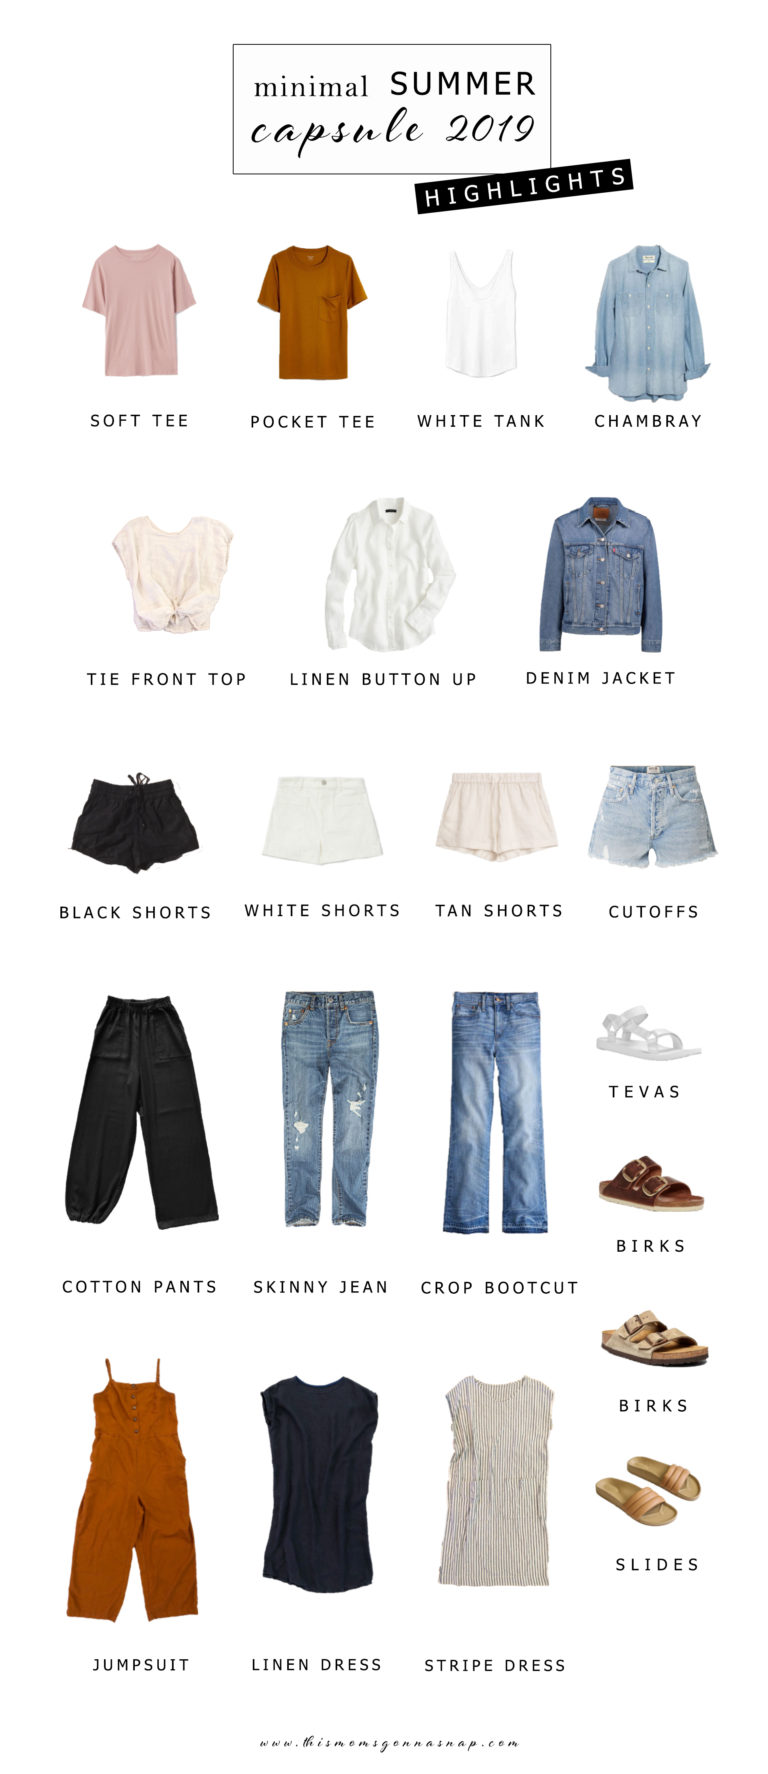 Summer Capsule Wardrobe: Just the Highlights - THIS MOM'S GONNA SNAP!